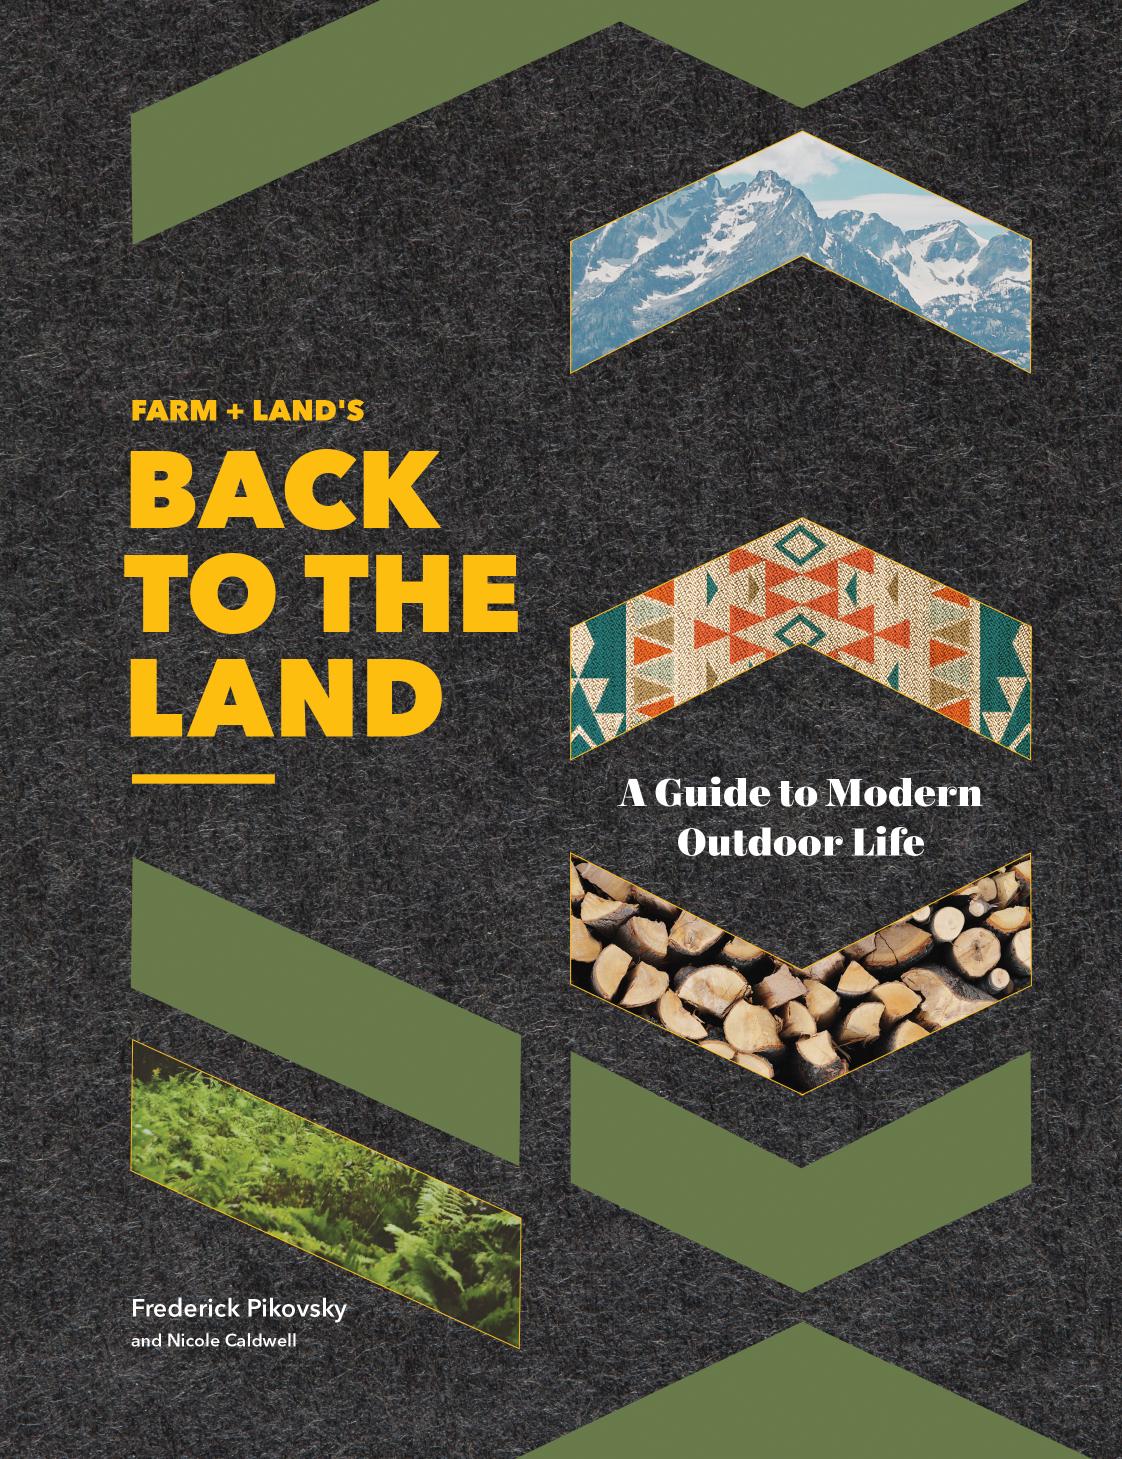 Farm + Land's Back to the Land by Freddie Pikovsky